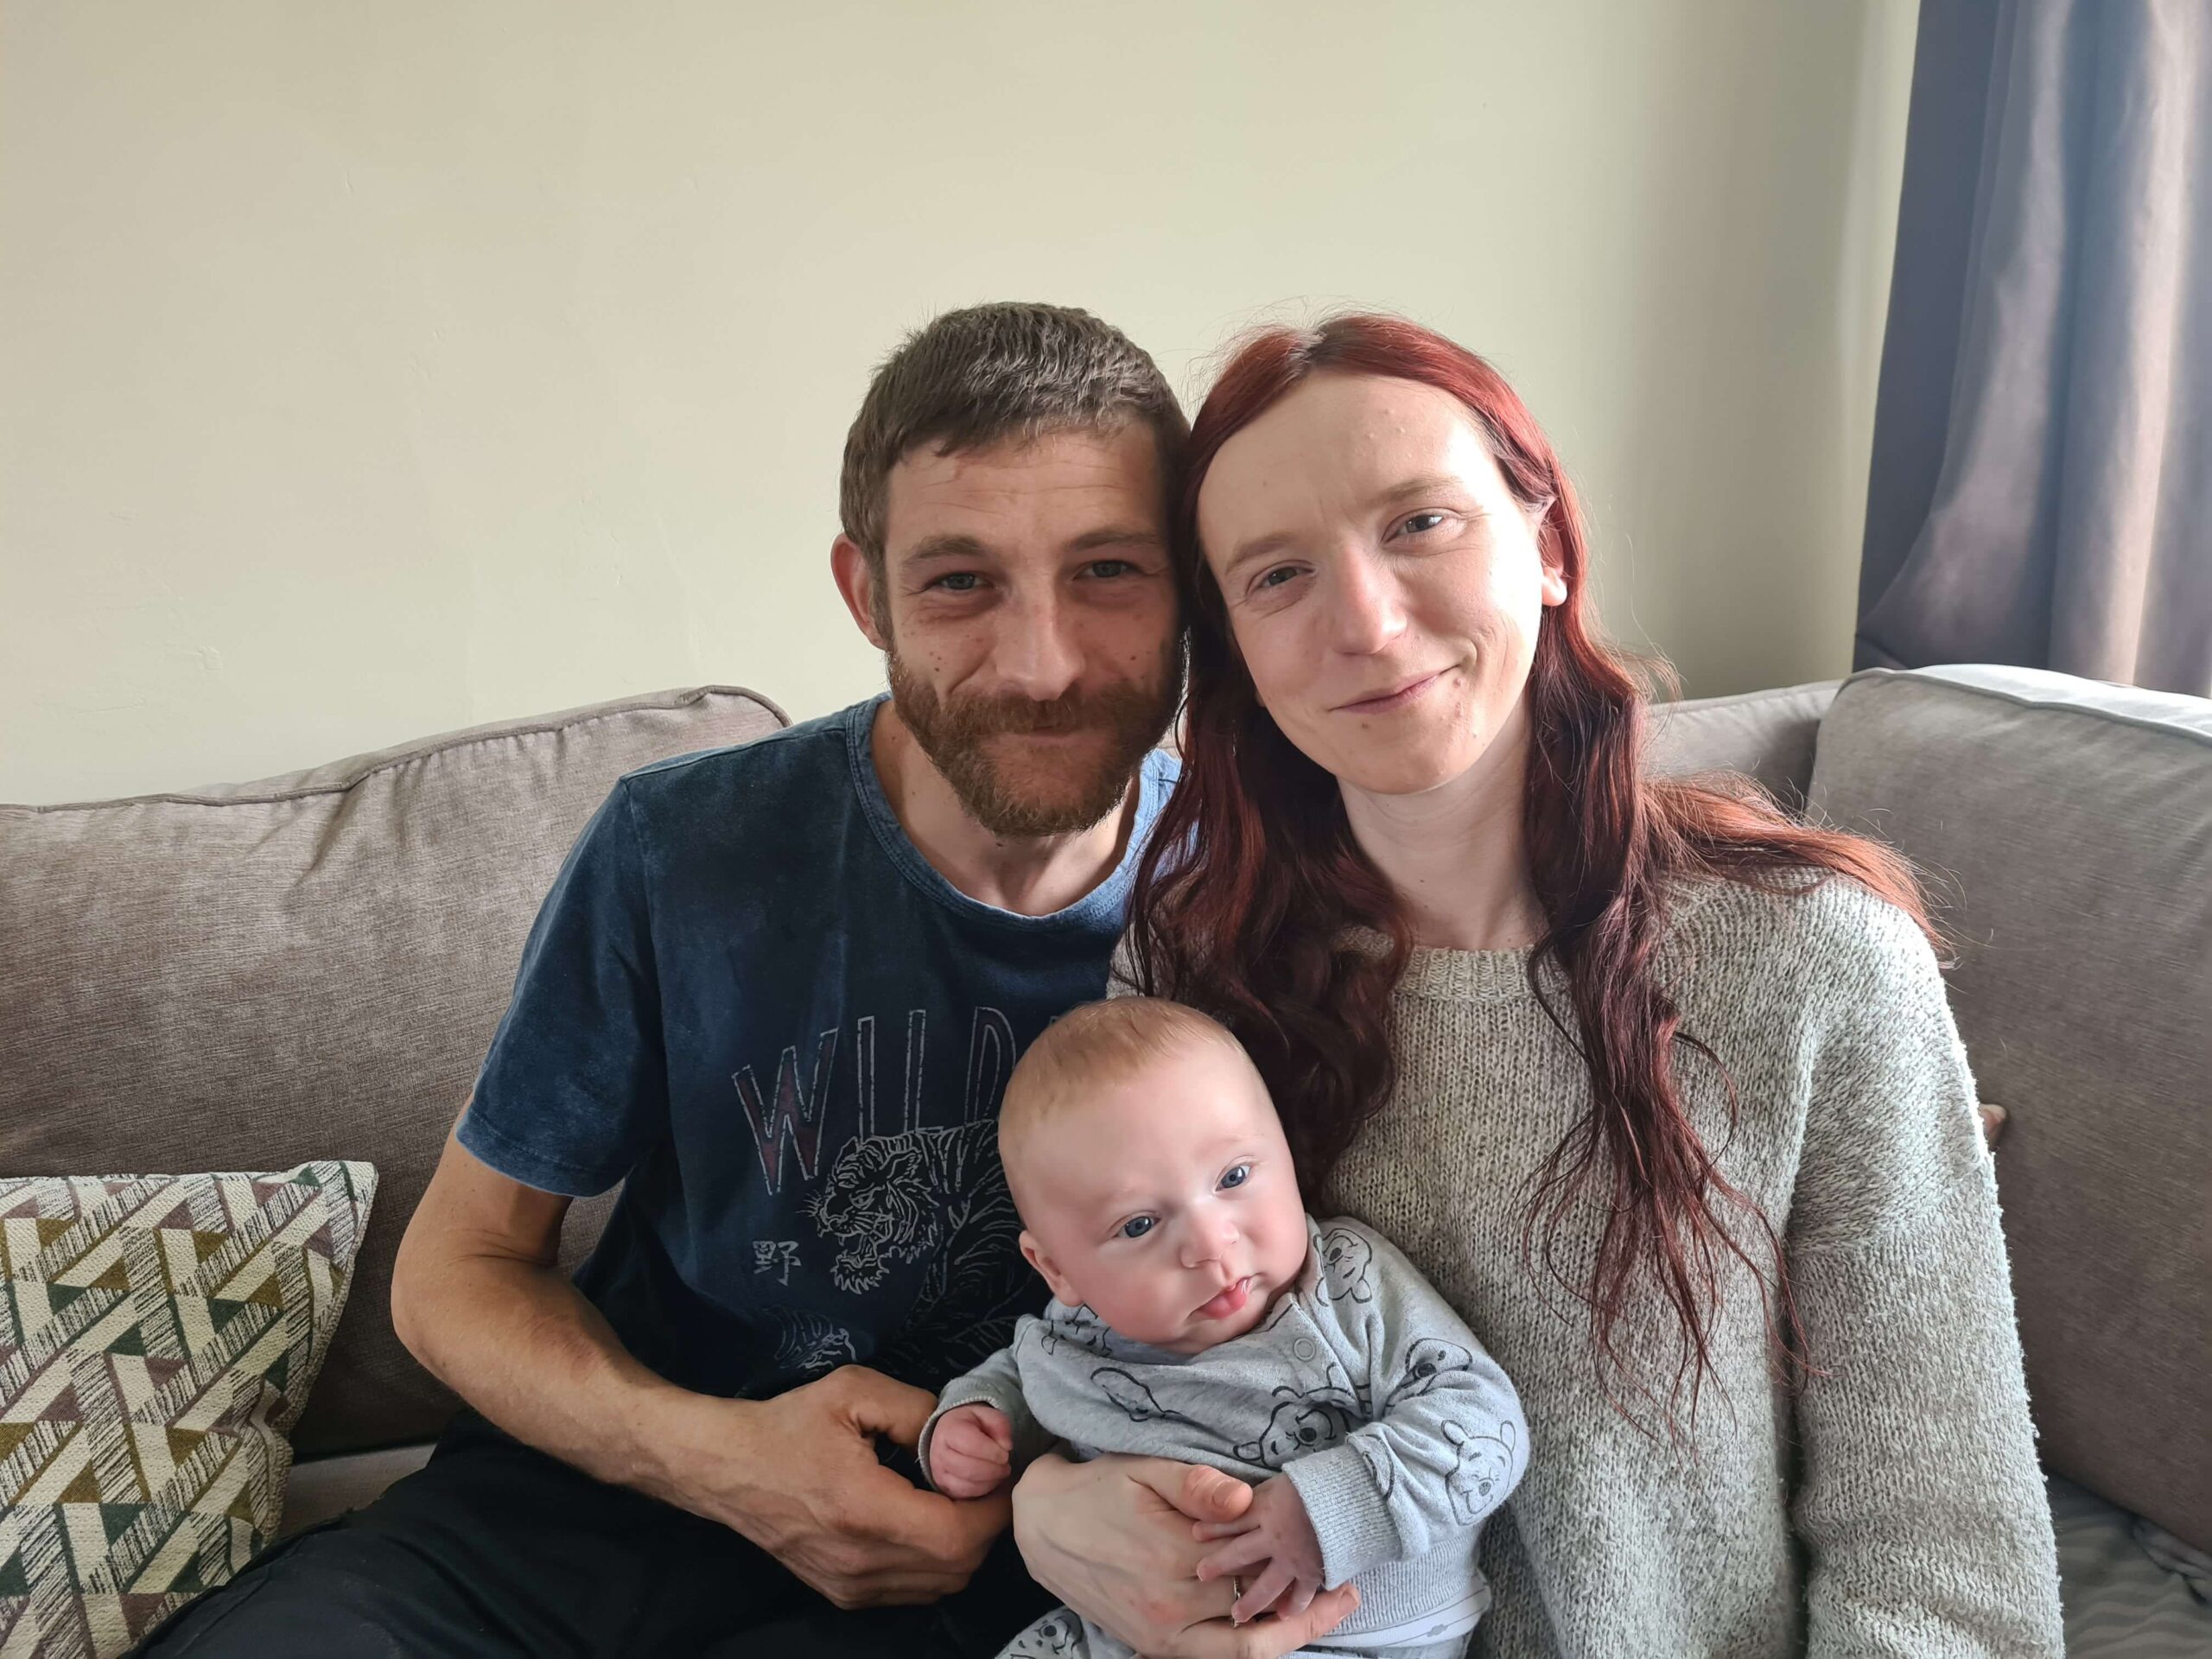 New dad who lived in a tent for months joins Derventio’s urgent Warwickshire landlords appeal featured image